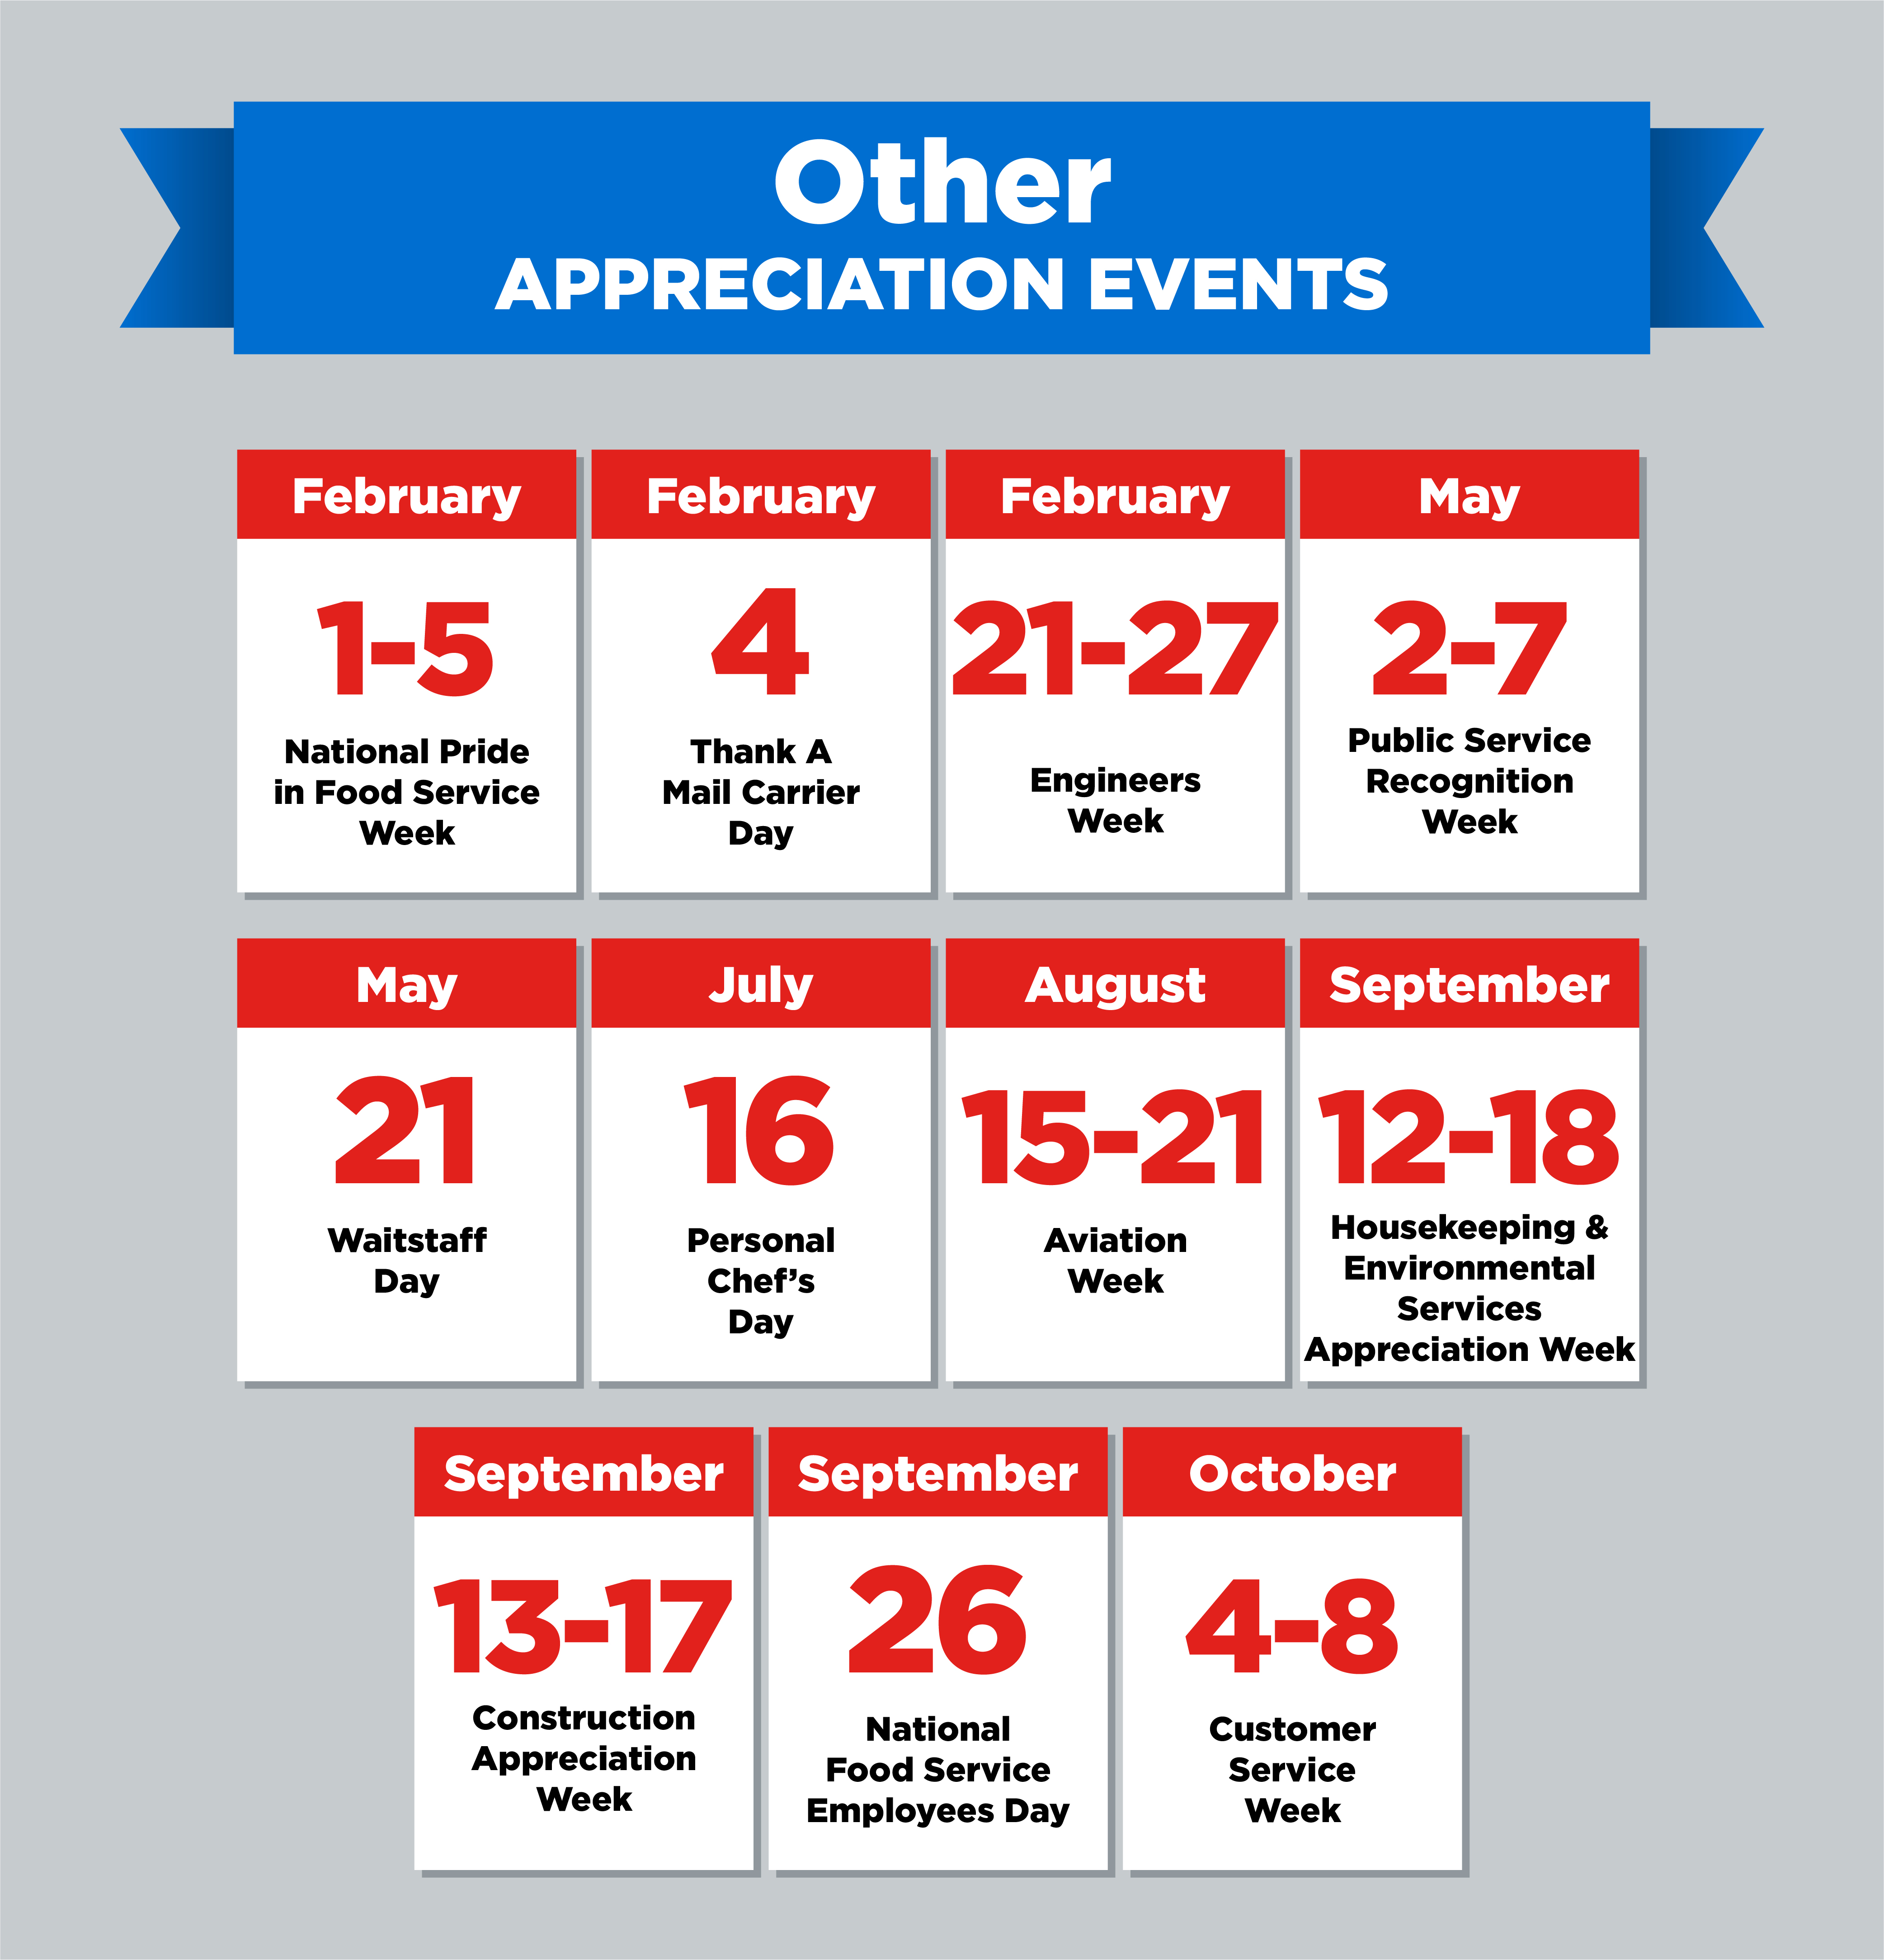 Employee appreciation holidays calendar for other industries